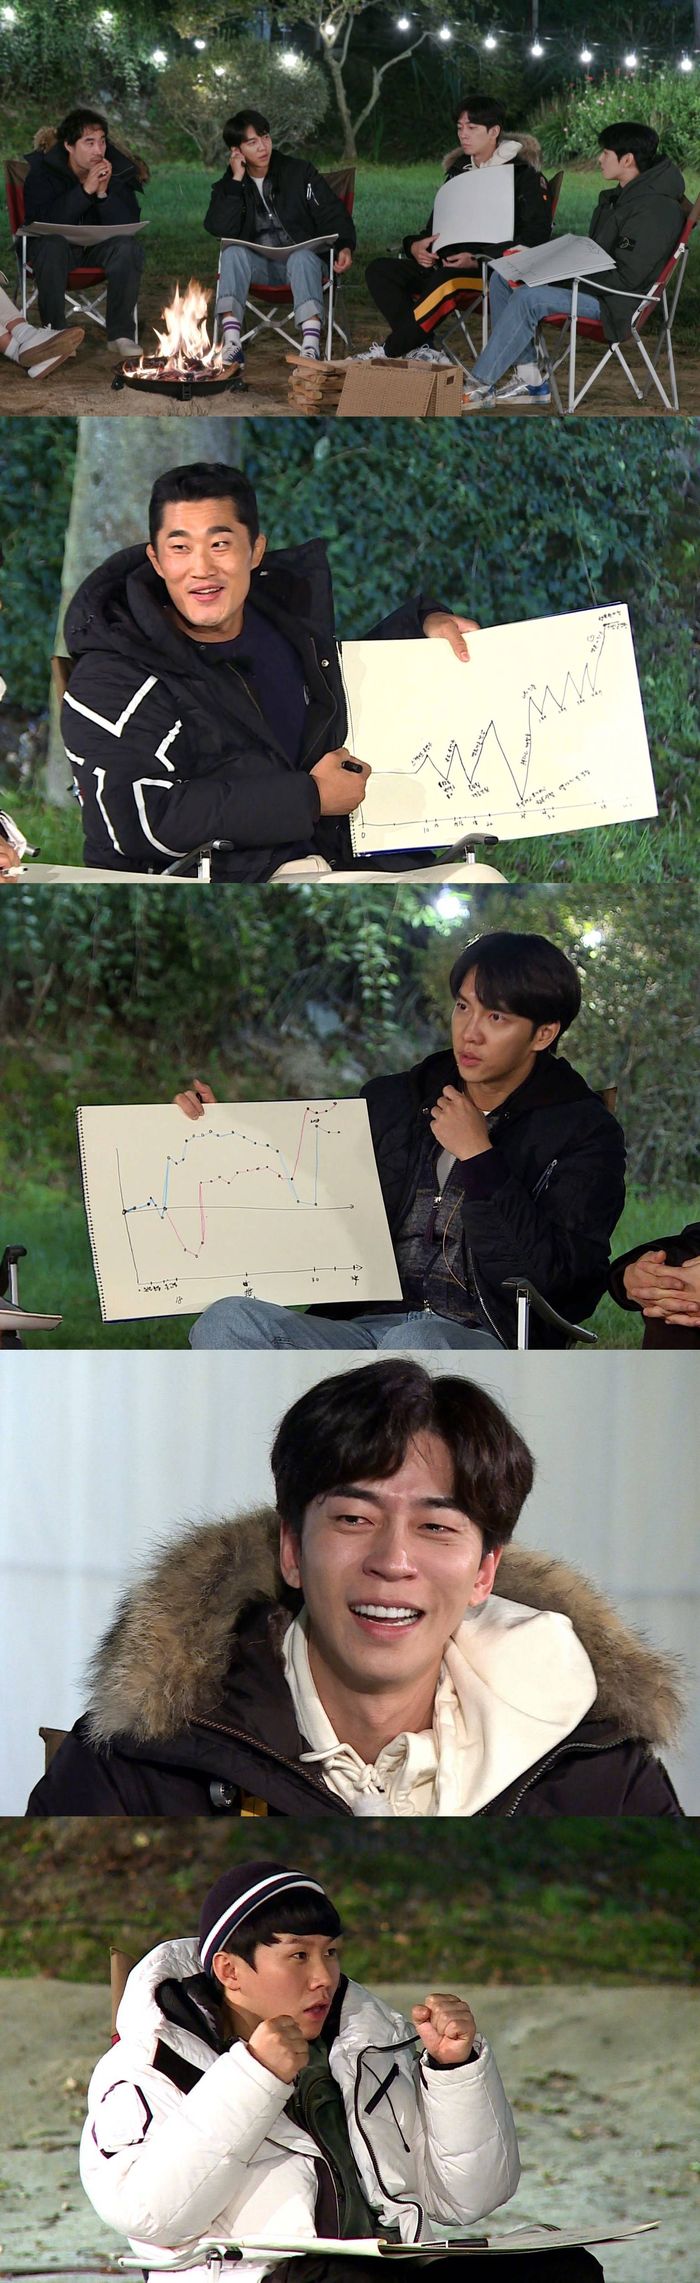 The life graph of All The Butlers members will be released.On SBS All The Butlers to be broadcast on the 25th, life graphs of master Bae Seong-woo and Lee Seung-gi, Yang Se-hyeong, Shin Sung-rok, Cha Eun-woo and Kim Dong-Hyun are released.At the time of the filming, the atmosphere was ripe for the camping night, and Bae Seong-woo and All The Butlers members shared their lives by drawing life graphs.They open the graph and openly Confessions about their own life bends.Fighter Kim Dong-Hyun briefly spoke about his days of quitting exercise and working part-time jobs such as PC rooms and blocked sewers, and Lee Seung-gi said, I did not hear my hearts voice in the past.In particular, Shin Sung-rok was looking at his graph and Bae Seong-woo said, (Shin Sung-rok) worked really hard, and he was full of fighting.I felt such an energy and I was so cool and envious.  (Nowadays) I lived without knowing who I was, he said. I lived really hard, he said. I miss the past, he said.On the other hand, the next day, Lets find out the meaning of the sky was the top model for the paragliding that both Bae Seong-woo and the members flew in the sky.Bae Seong-woo and members are genuinely Confessions Life Graph and Paragliding Top Model will be released on All The Butlers, which will be broadcasted at 6:25 pm on the 25th.